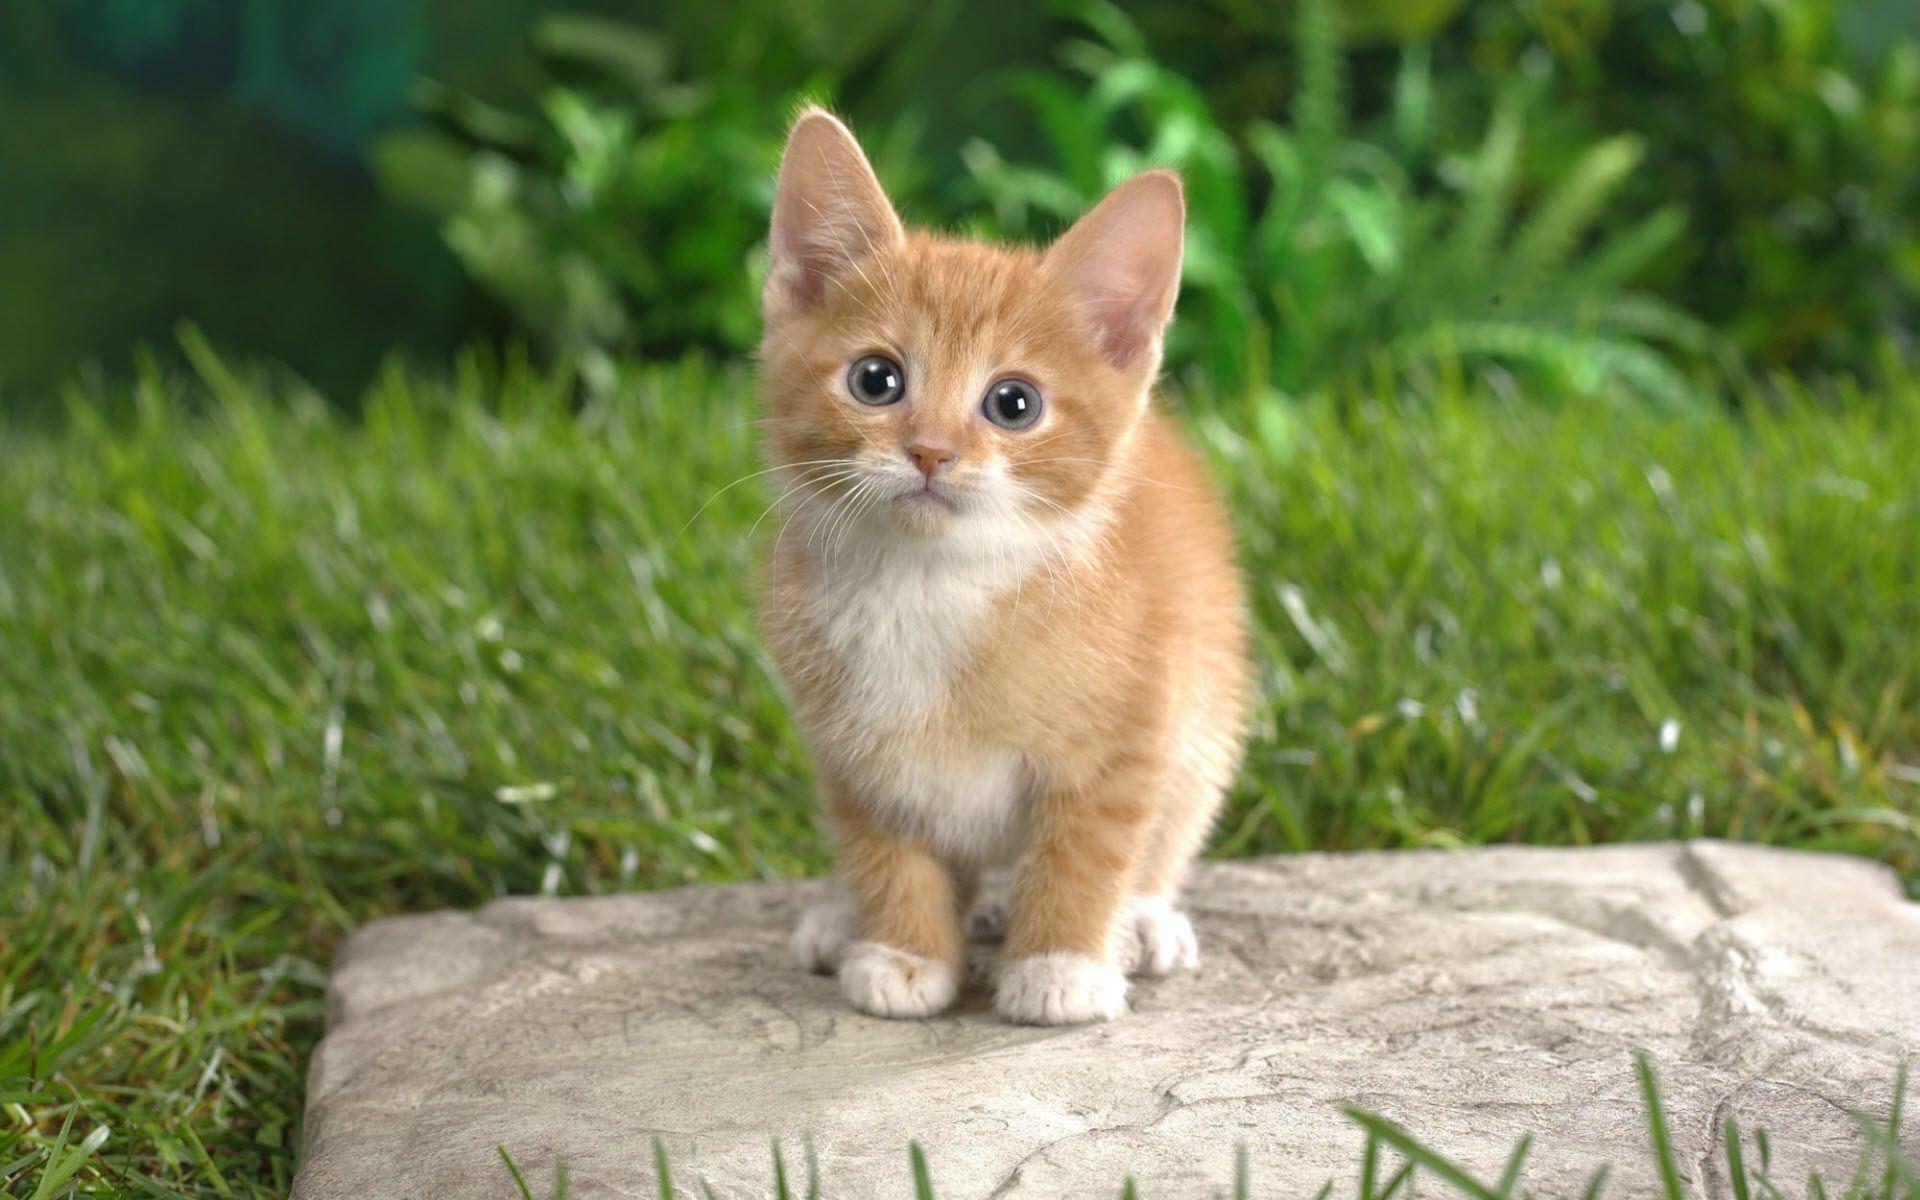 Wallpapers Of Kittens